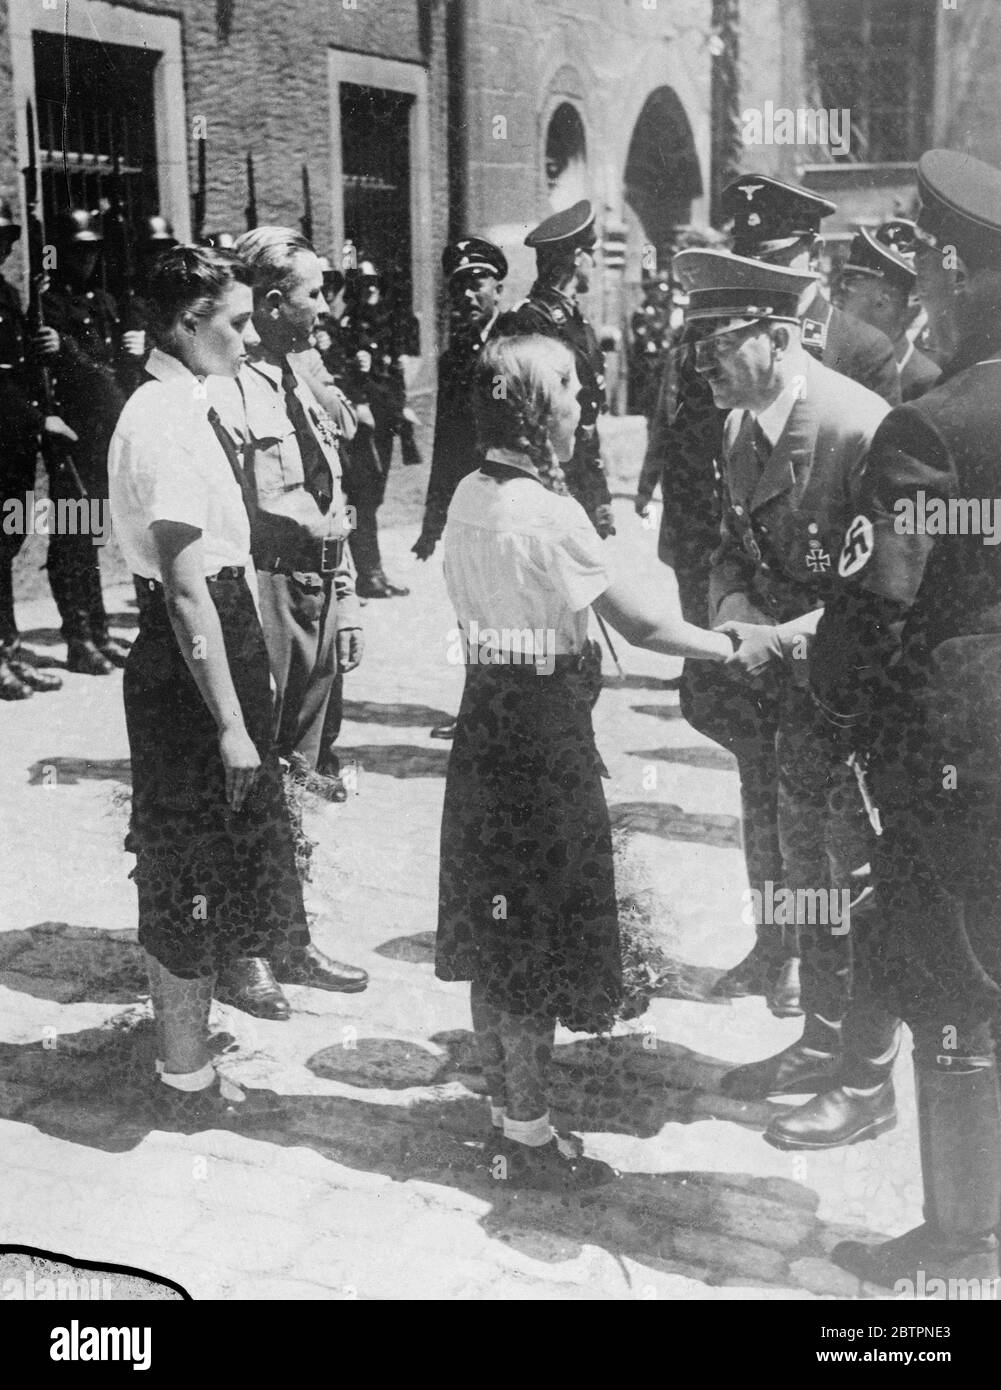 Hitler was a good listener!. Chancellor Hitler holding the arm of the Burgomaster's young daughter in a friendly handshake as he listened earnestly to her welcoming speech at Regensburg, Eastern Bavaria. During his visit to the town,Herr Hitler unveiled a bust of Anton Bruckner, the German composer, in Valhalla, and addressed a meeting of 150,000 Nazis. In his speech he dealt with disarmament. He said that Germany has become distrustful, but disarmament was not out of the question if somebody else set the example. Stock Photo